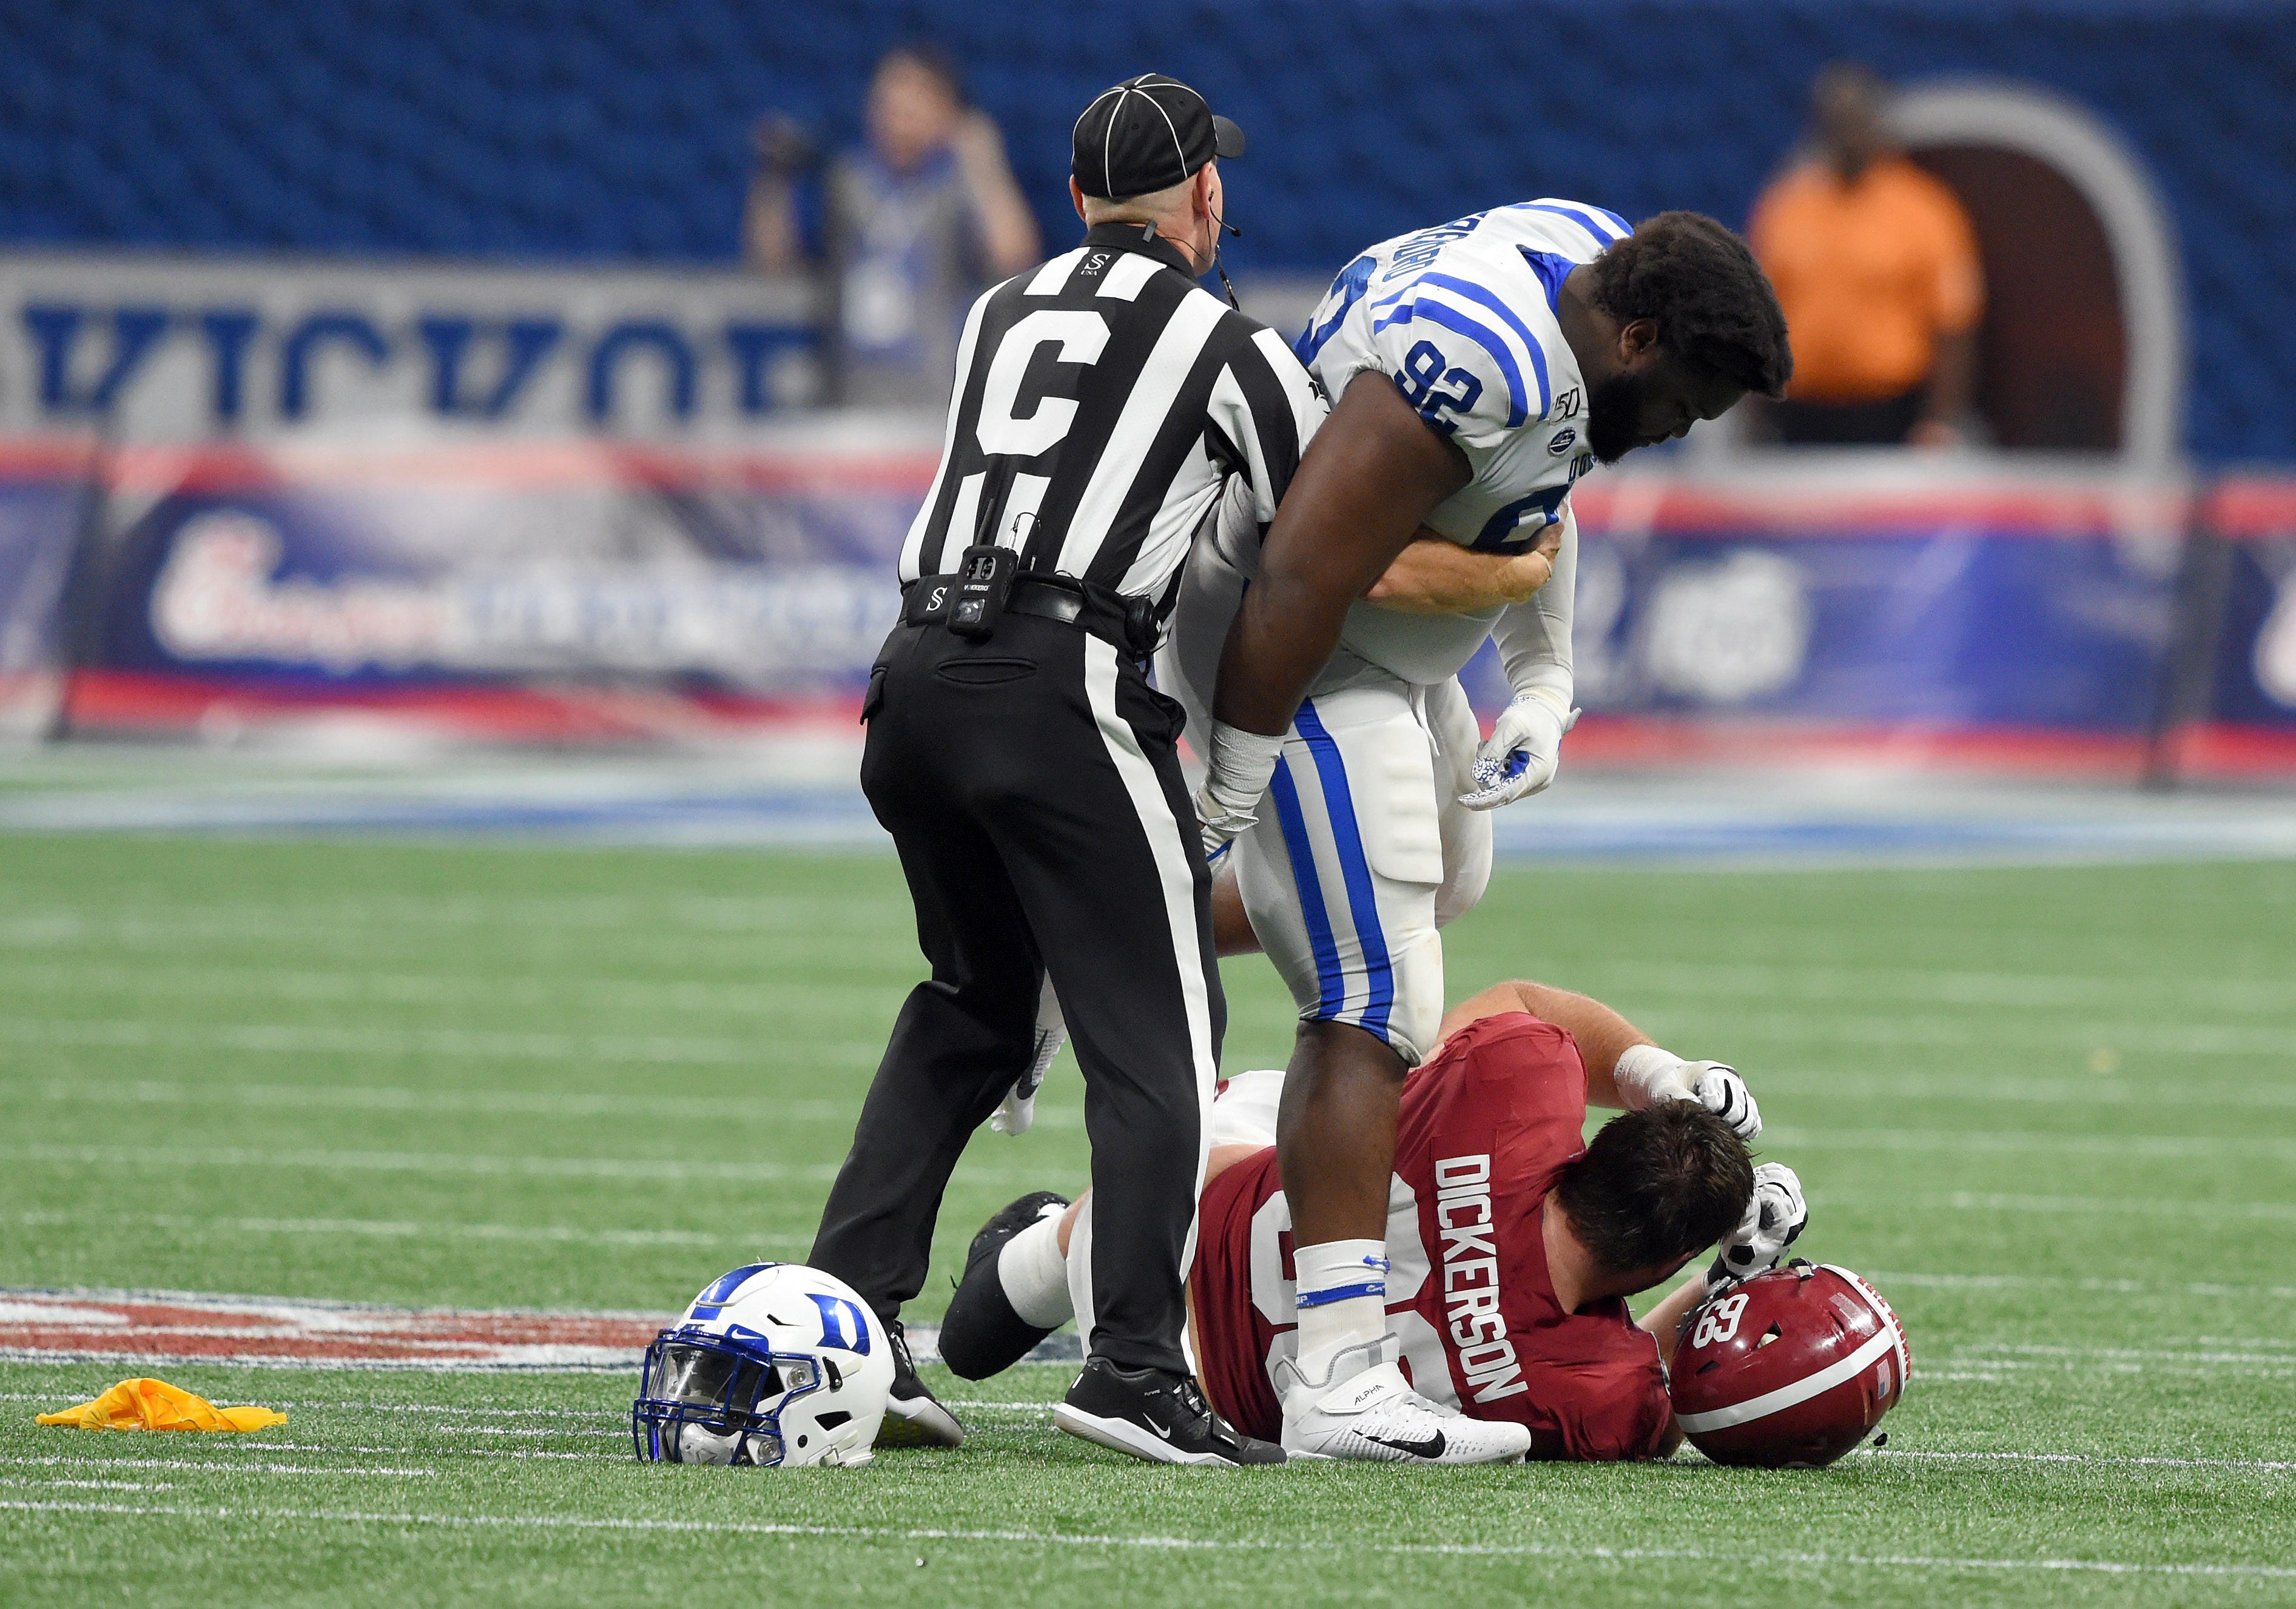 Aug 31, 2019; Atlanta, GA, USA; Duke Blue Devils defensive tackle Edgar Cerenord (92) gets restrained by an official as he hovers over Alabama Crimson Tide offensive lineman Landon Dickerson (69) during the third quarter at Mercedes-Benz Stadium. Cerenord was ejected from the game. Mandatory Credit: John David Mercer-USA TODAY Sports